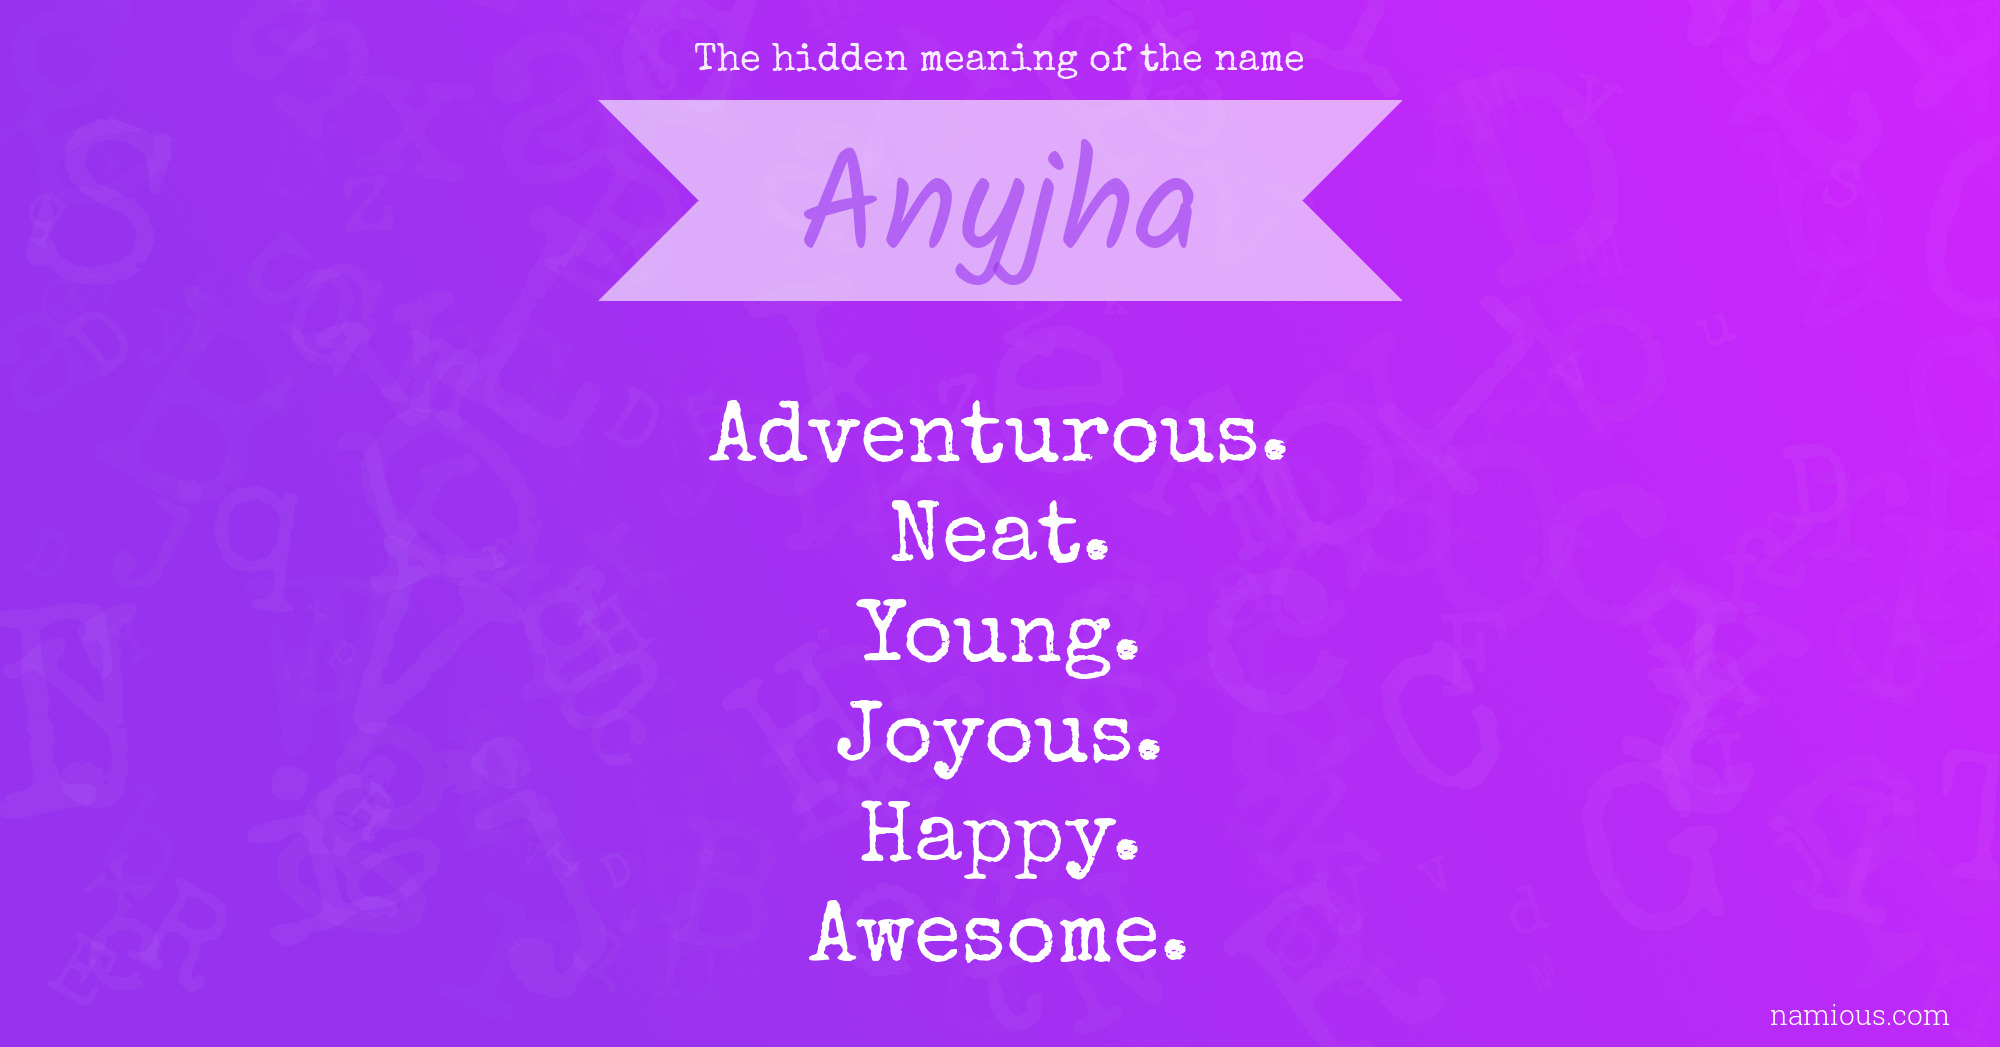 The hidden meaning of the name Anyjha